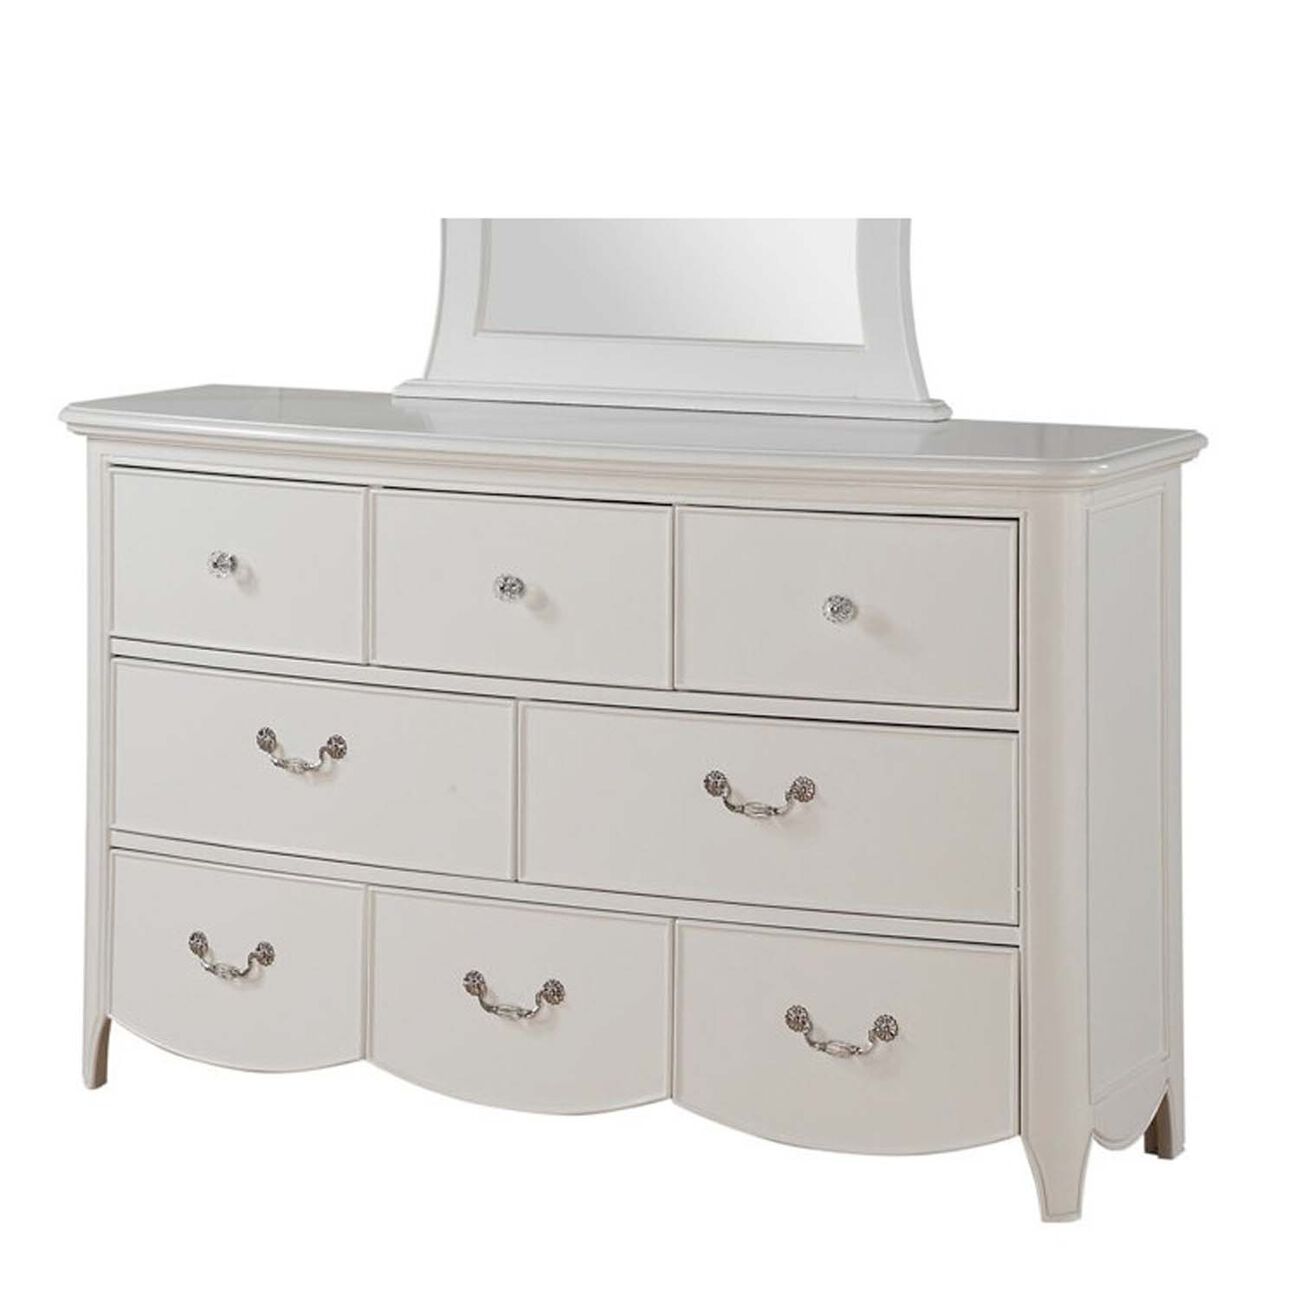 8 Drawer Dresser with Crystal Metal Handles and Tapered Legs, White